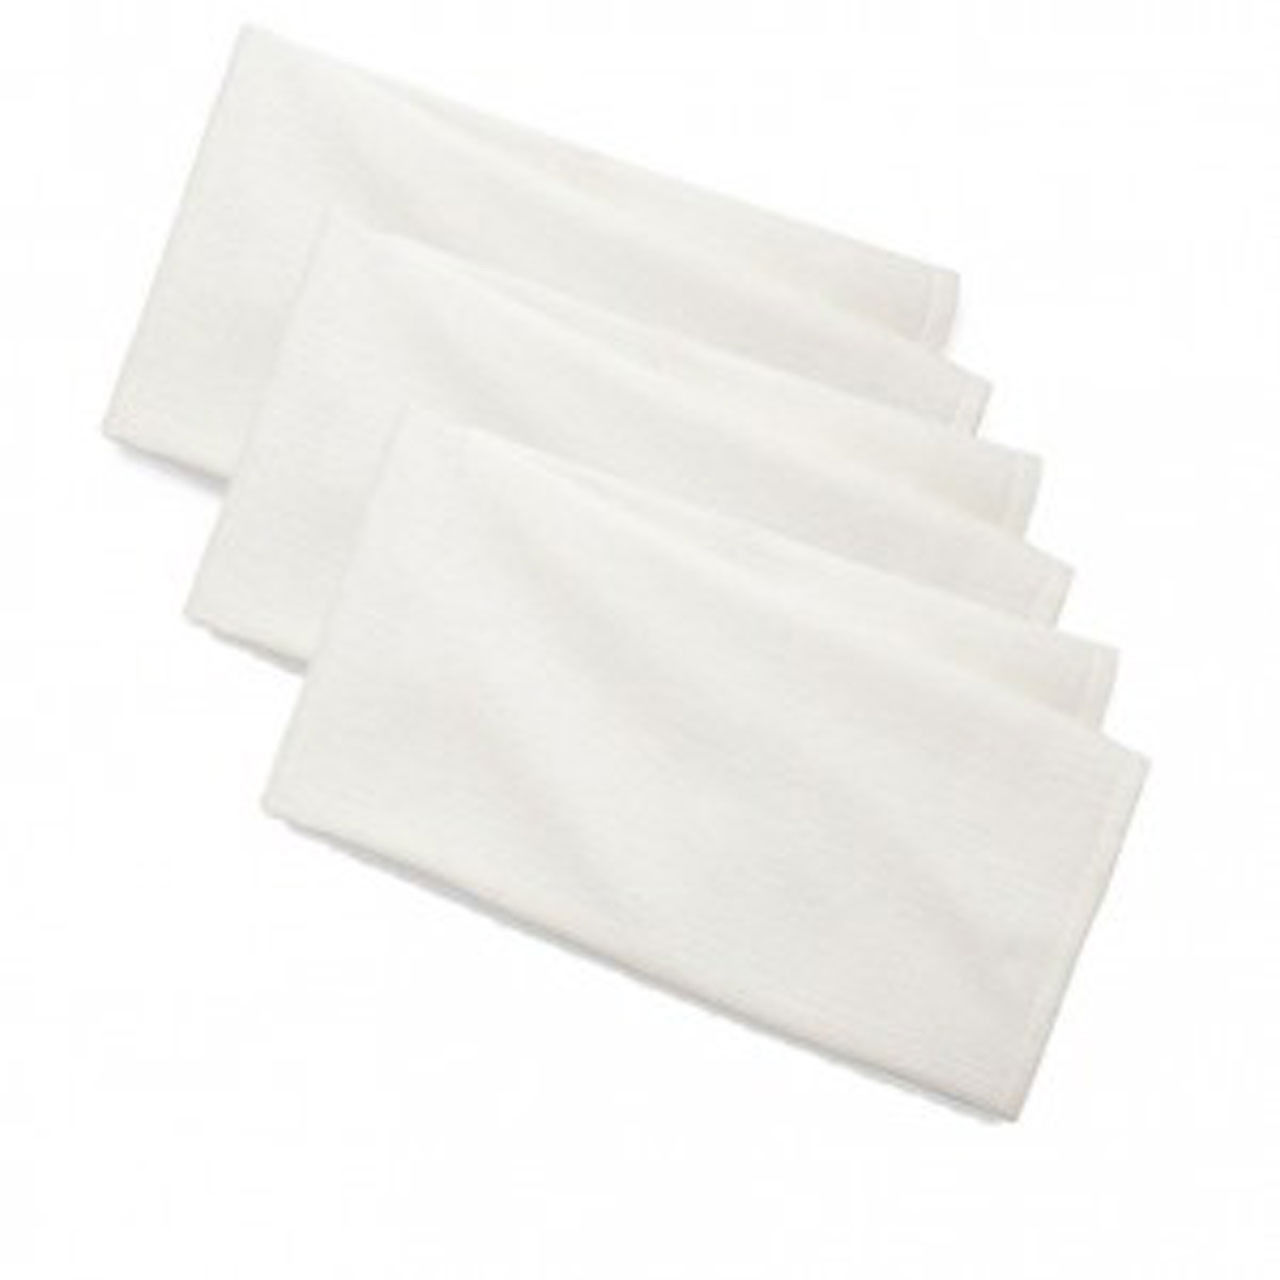 Which applications are huck towels ideal for?